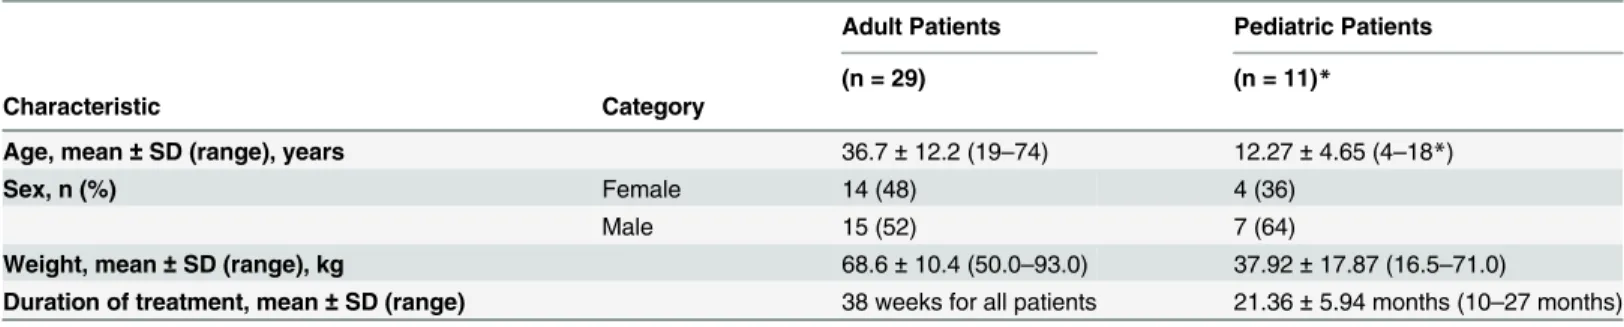 Table 1. Baseline demographics of adult and pediatric patients.